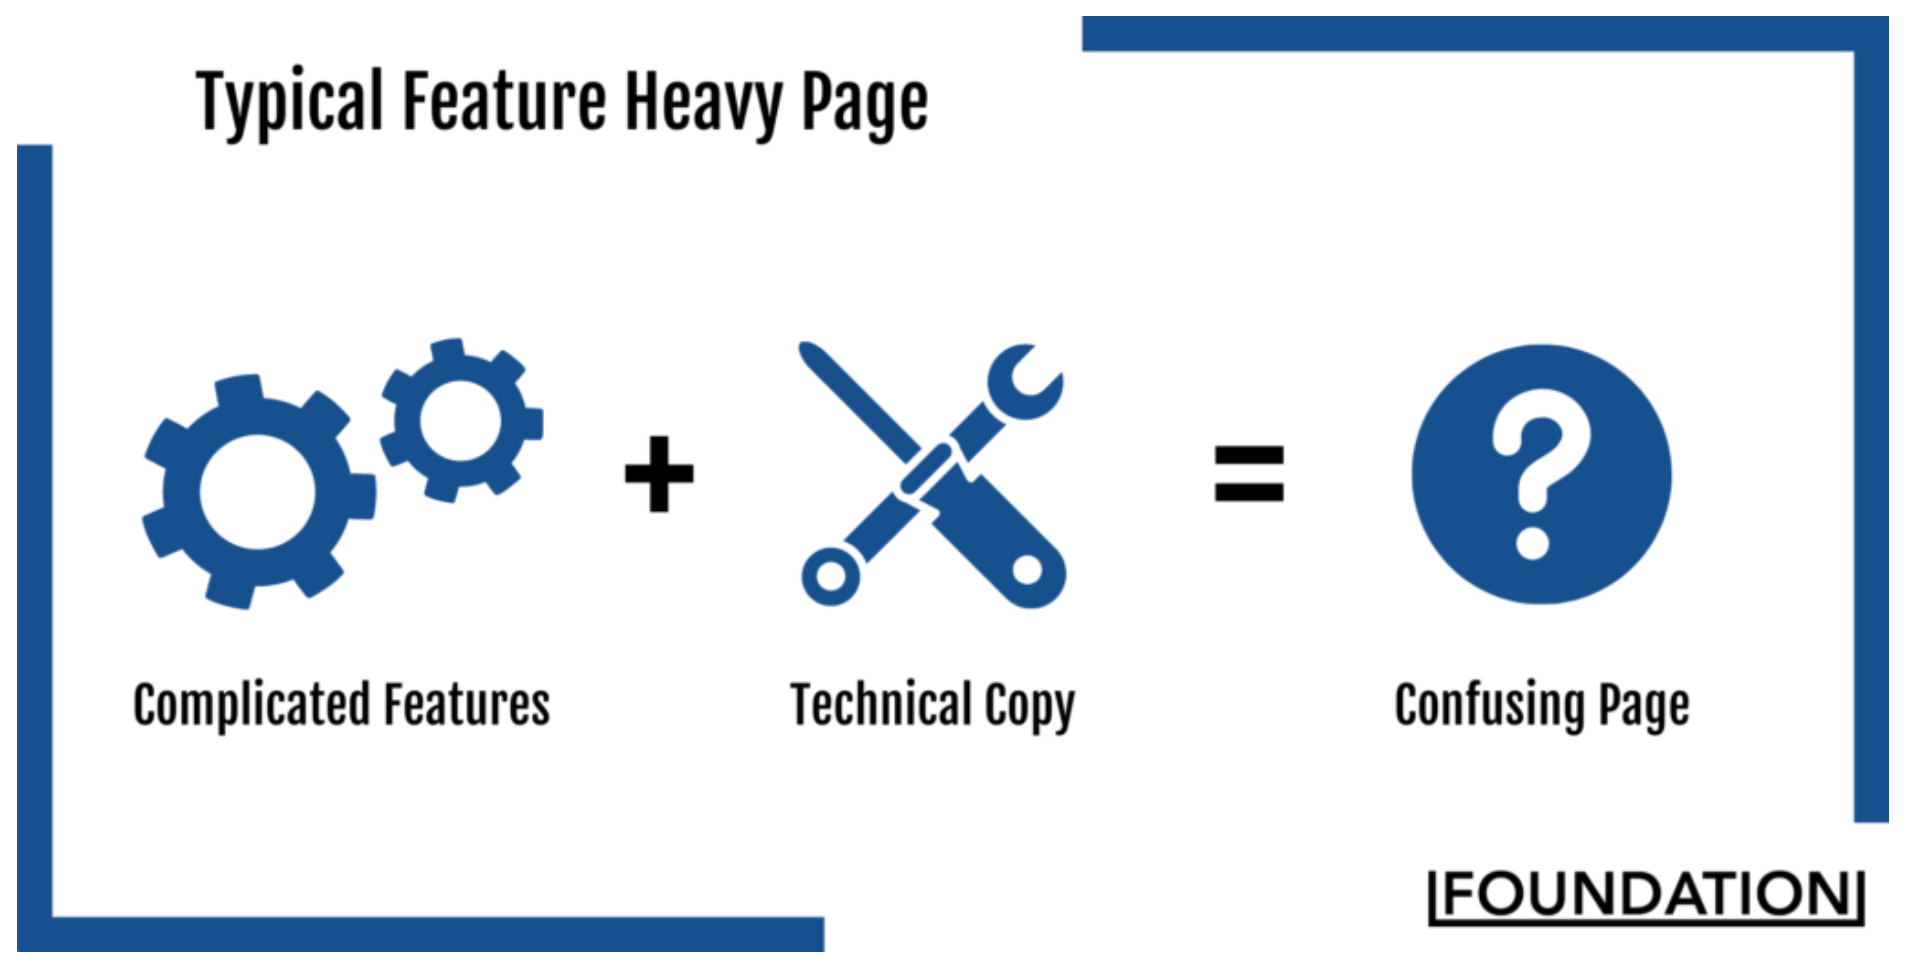 Feature Heavy Page Elements